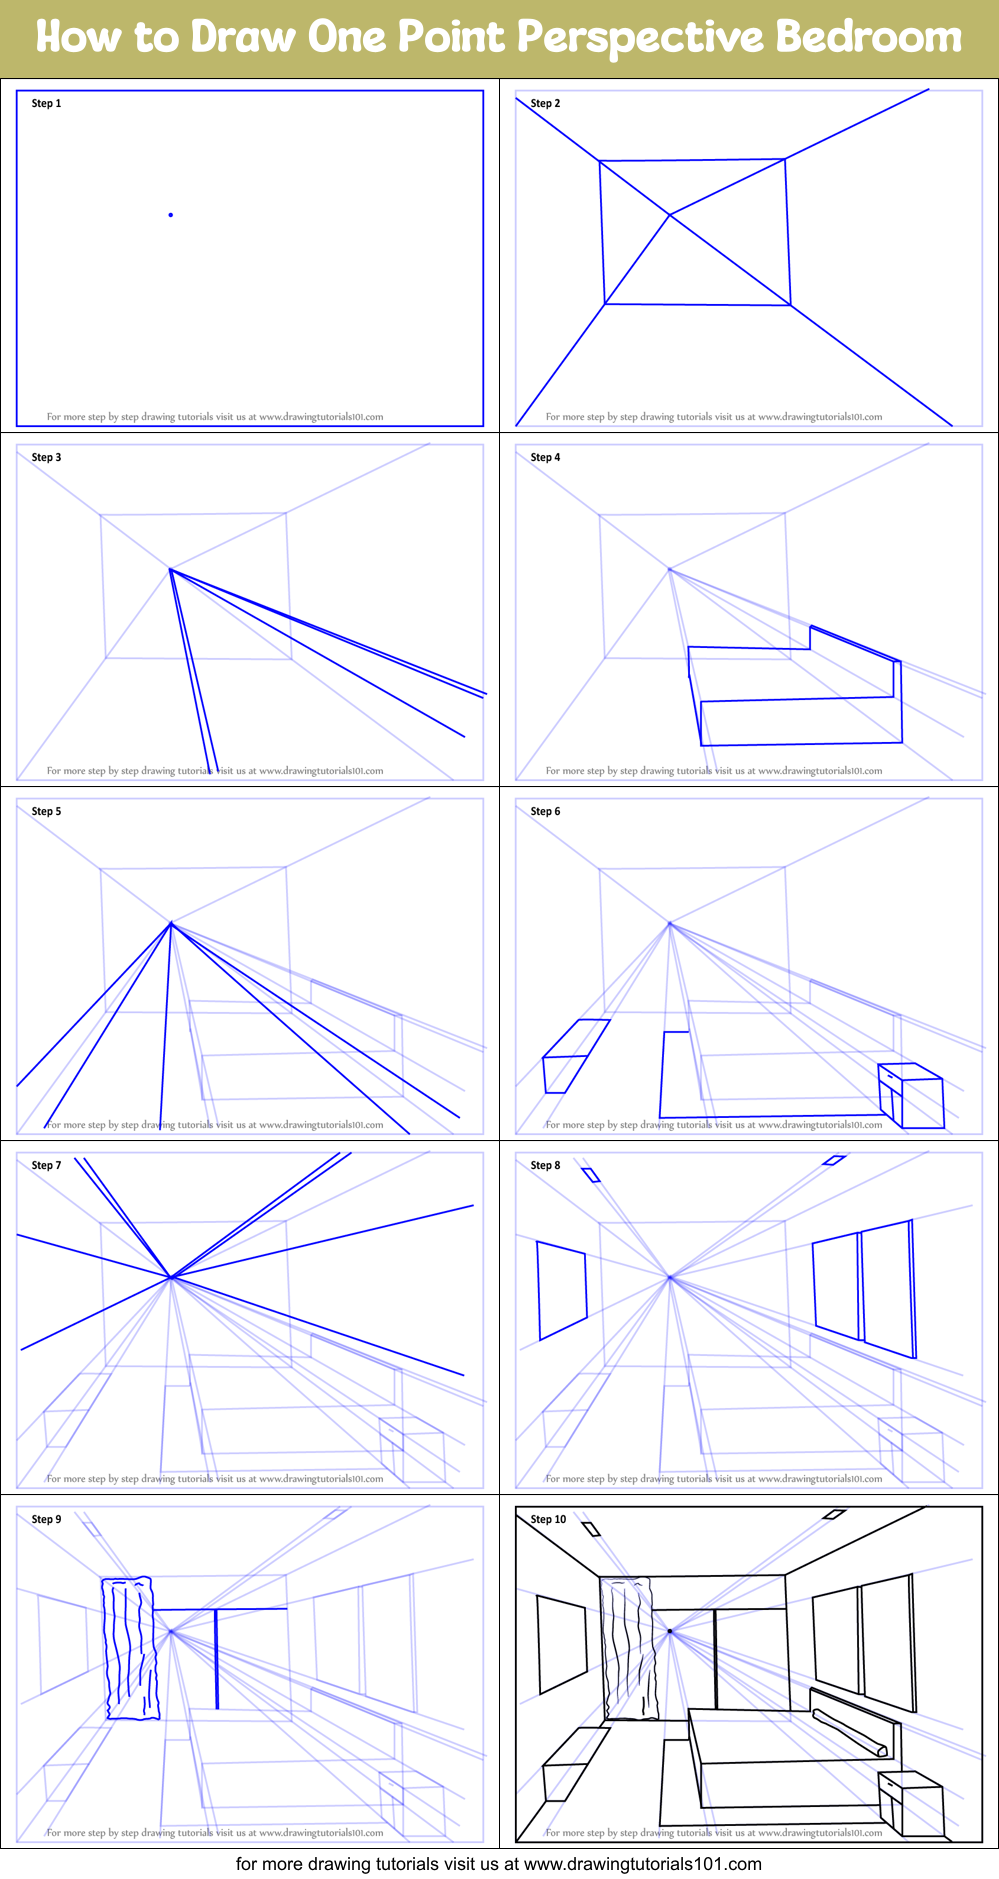 How To Draw One Point Perspective Bedroom Step By Step 